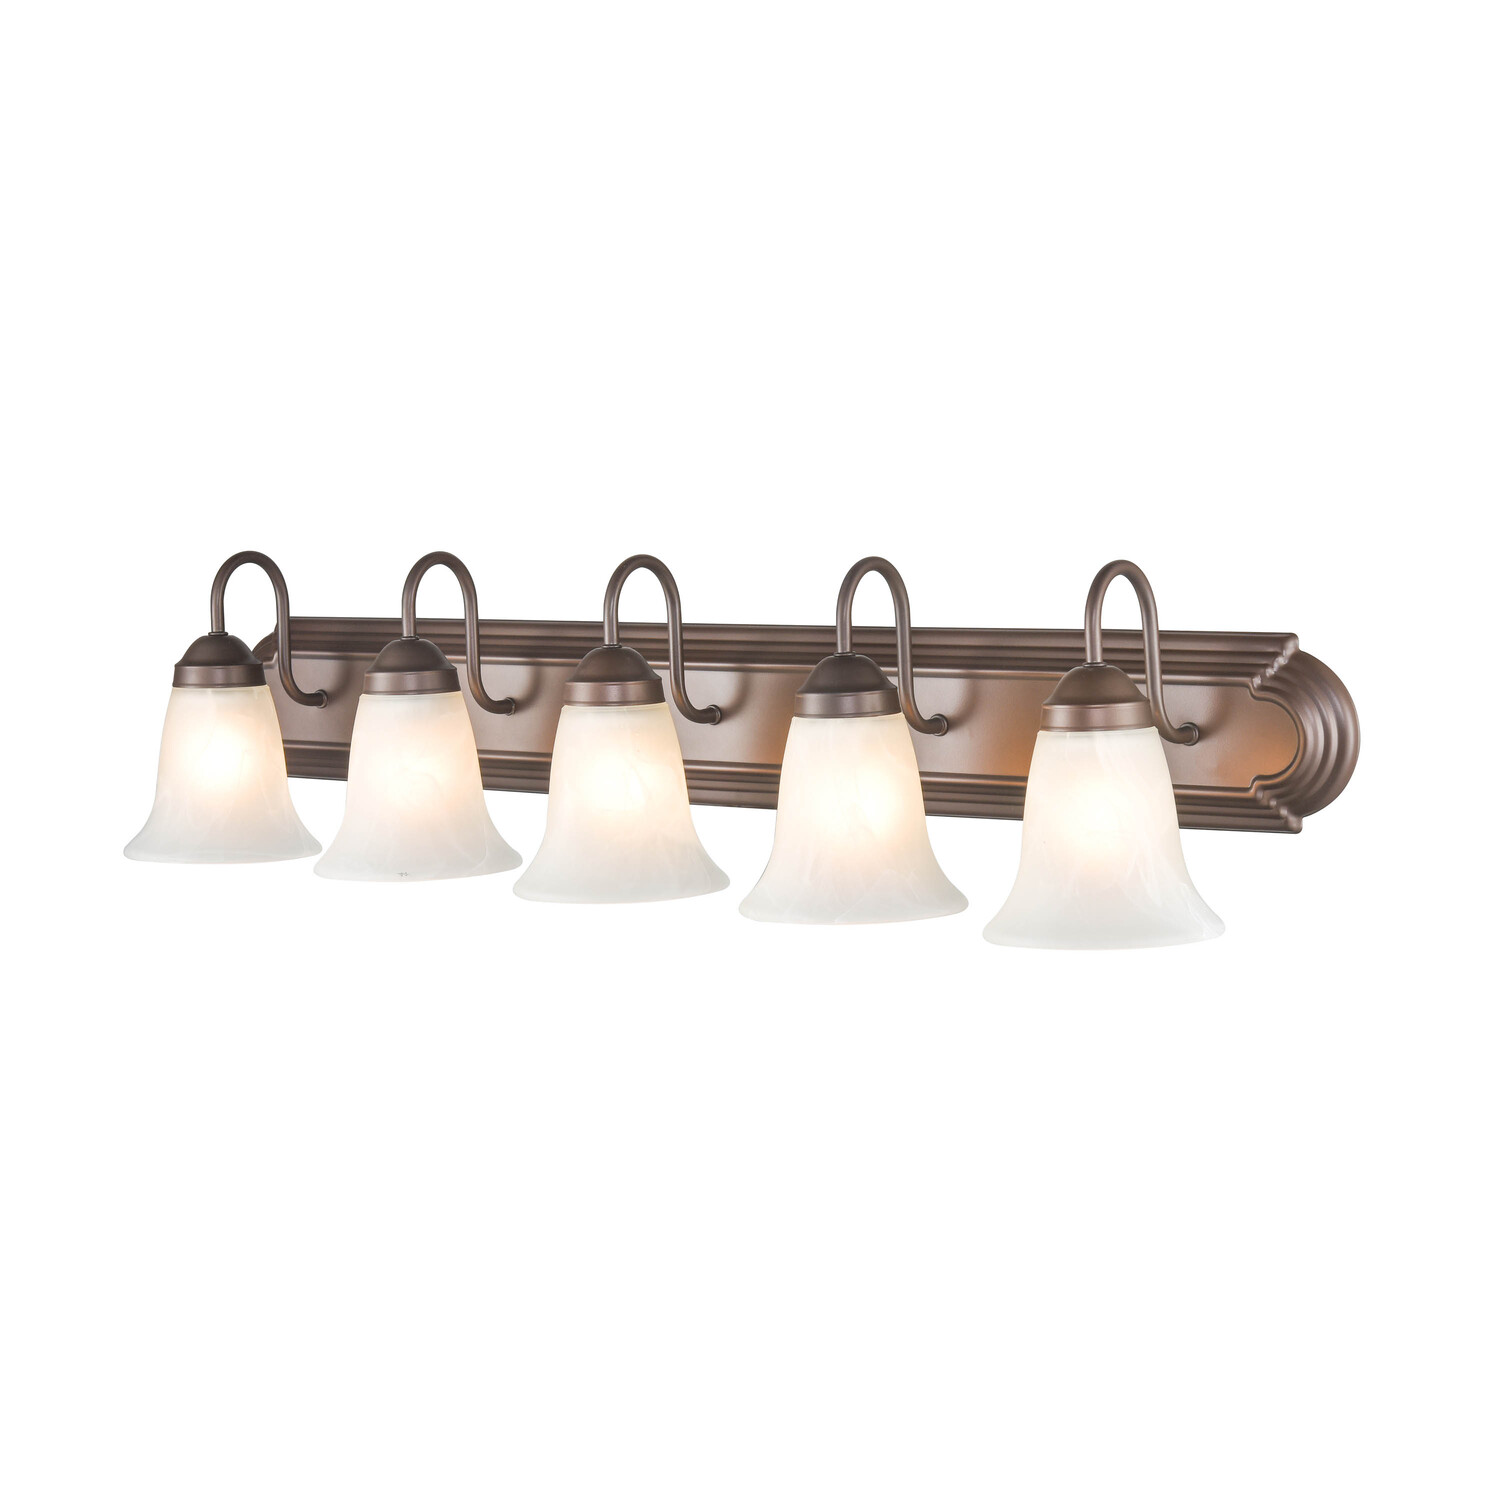 4285-BZ-Millennium Lighting-5 Light Bath Vanity-8.5 Inches Tall and 36 Inches Wide-Bronze Finish - image 2 of 6